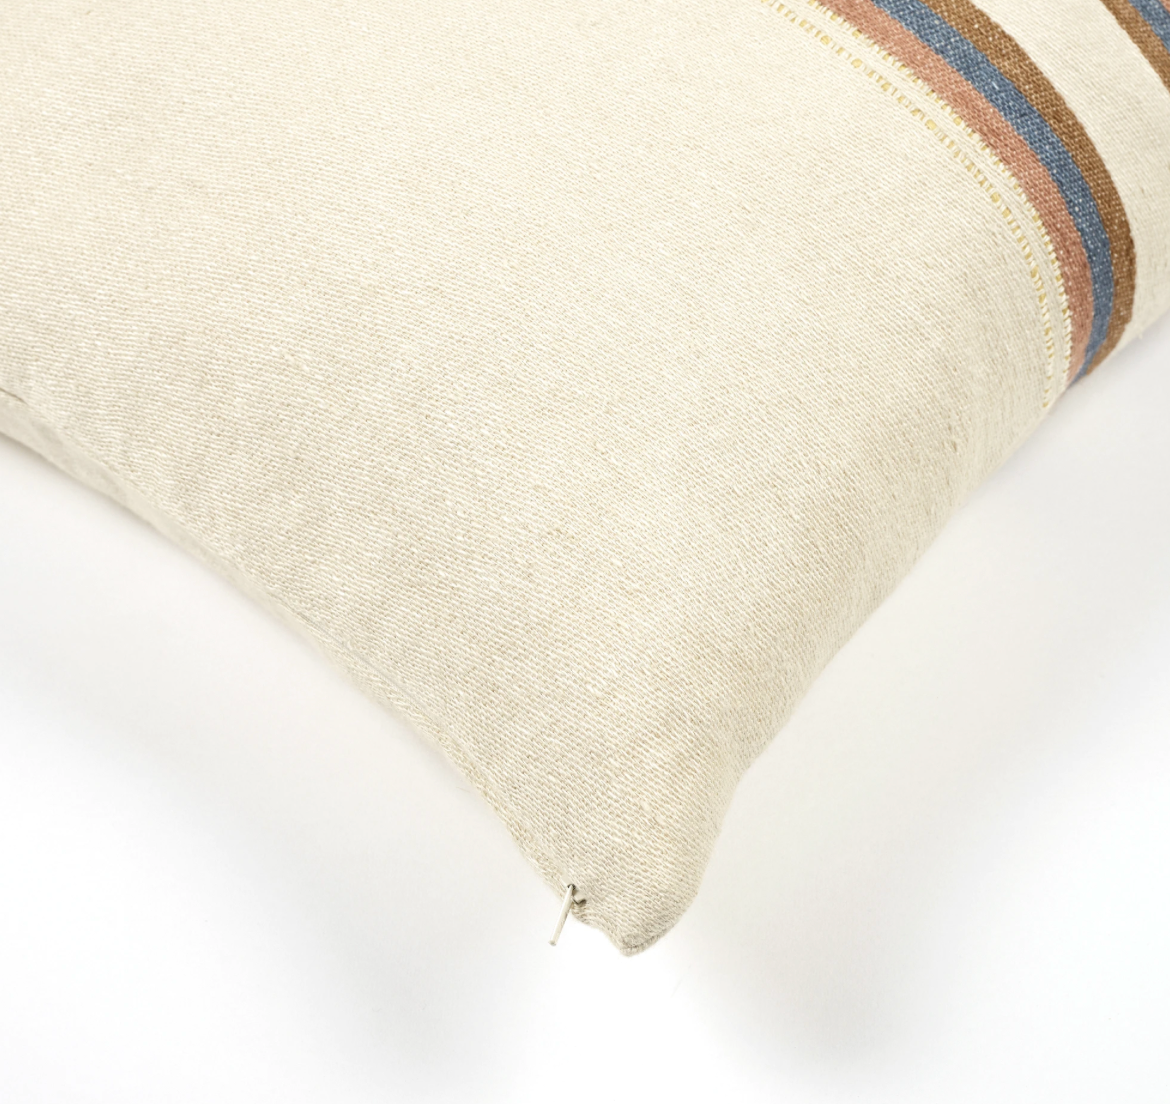 Harlan Stripe linen pillow covers by Libeco